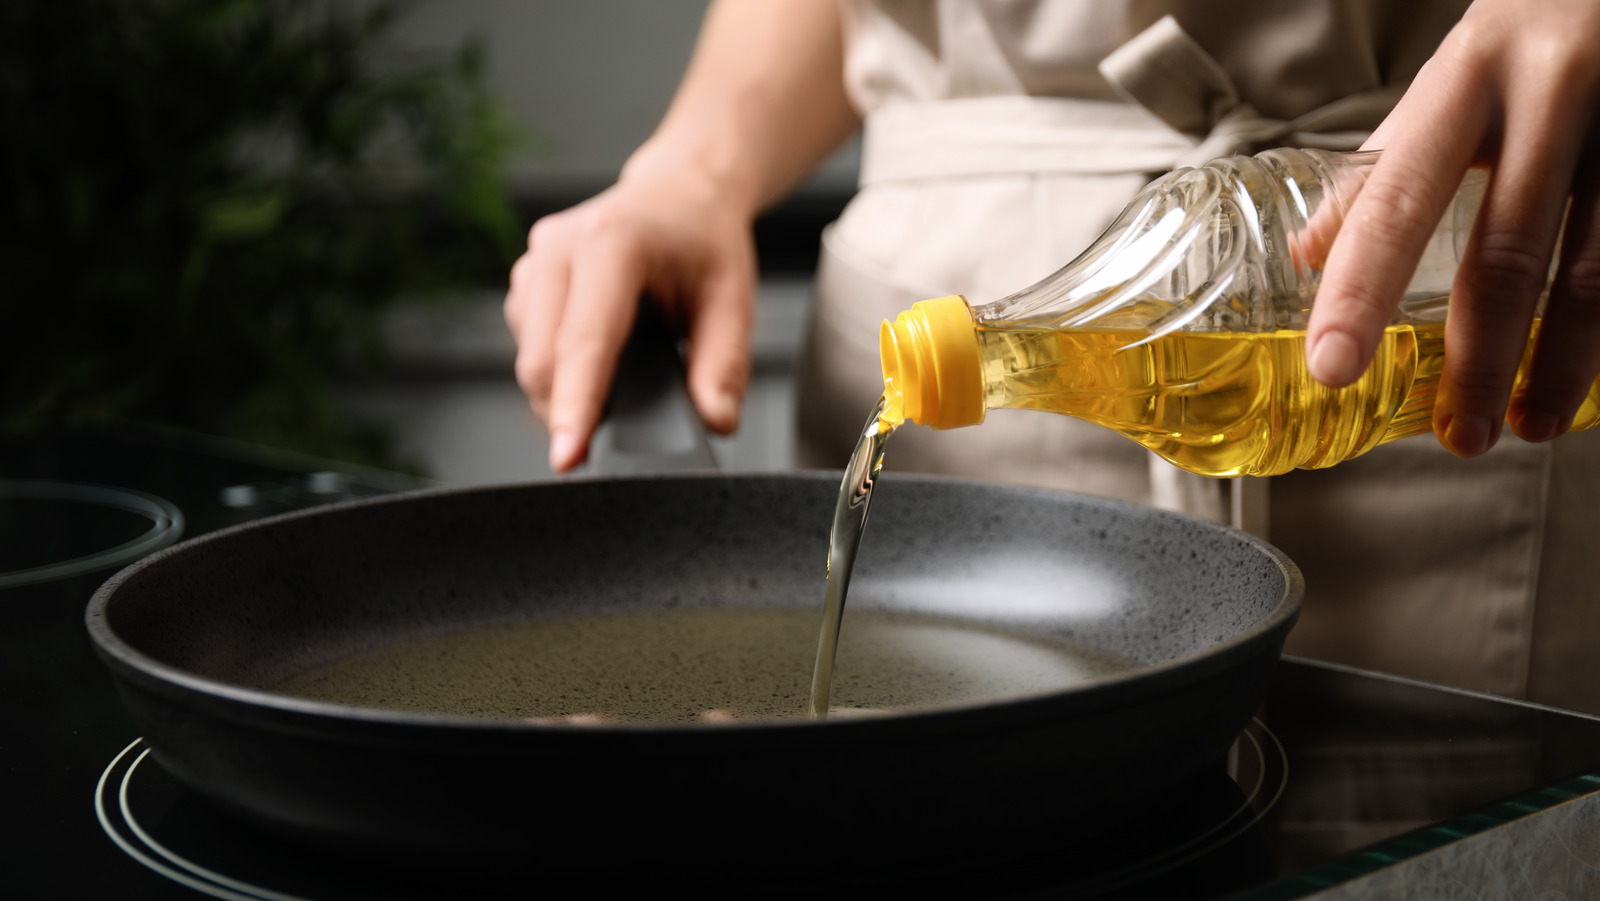 4 Healthy Cooking Oils (and 4 to Avoid)